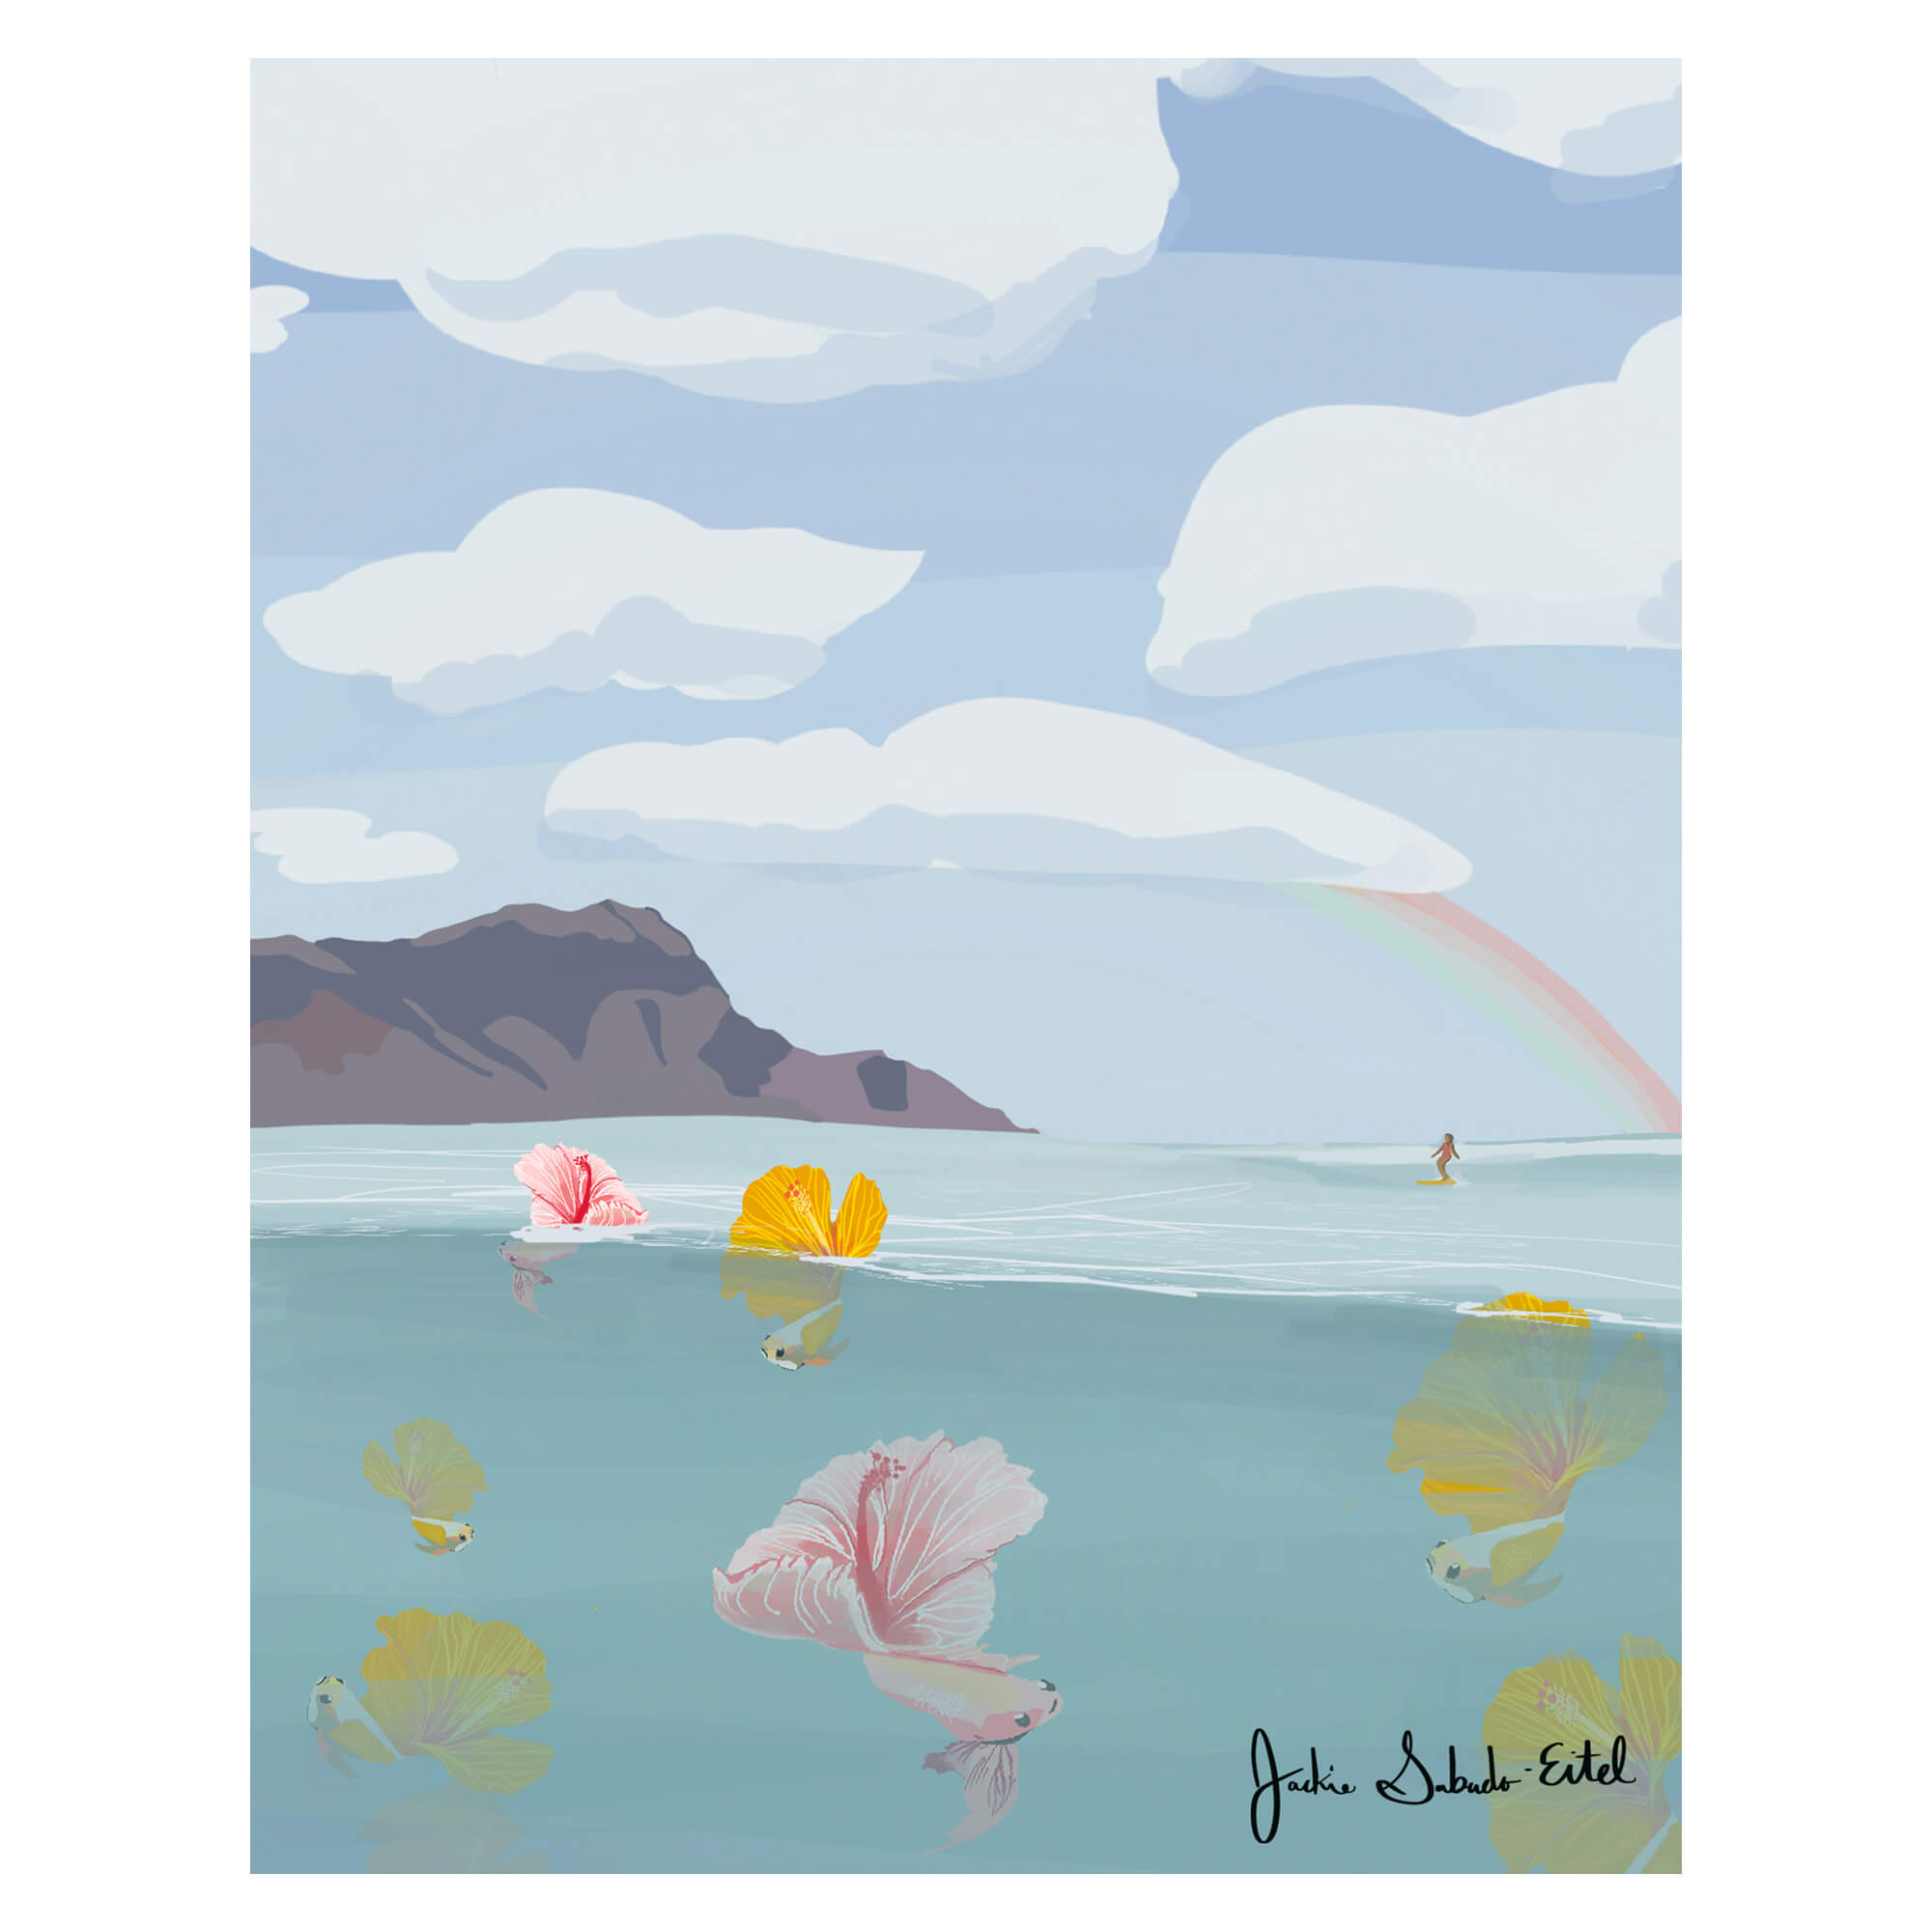 A wood print of colorful tropical fish with hibiscus flowers as their tails, the Diamond Head in the background with a woman surfing, printed on a birch wood panel by Hawaii artist Jackie Eitel